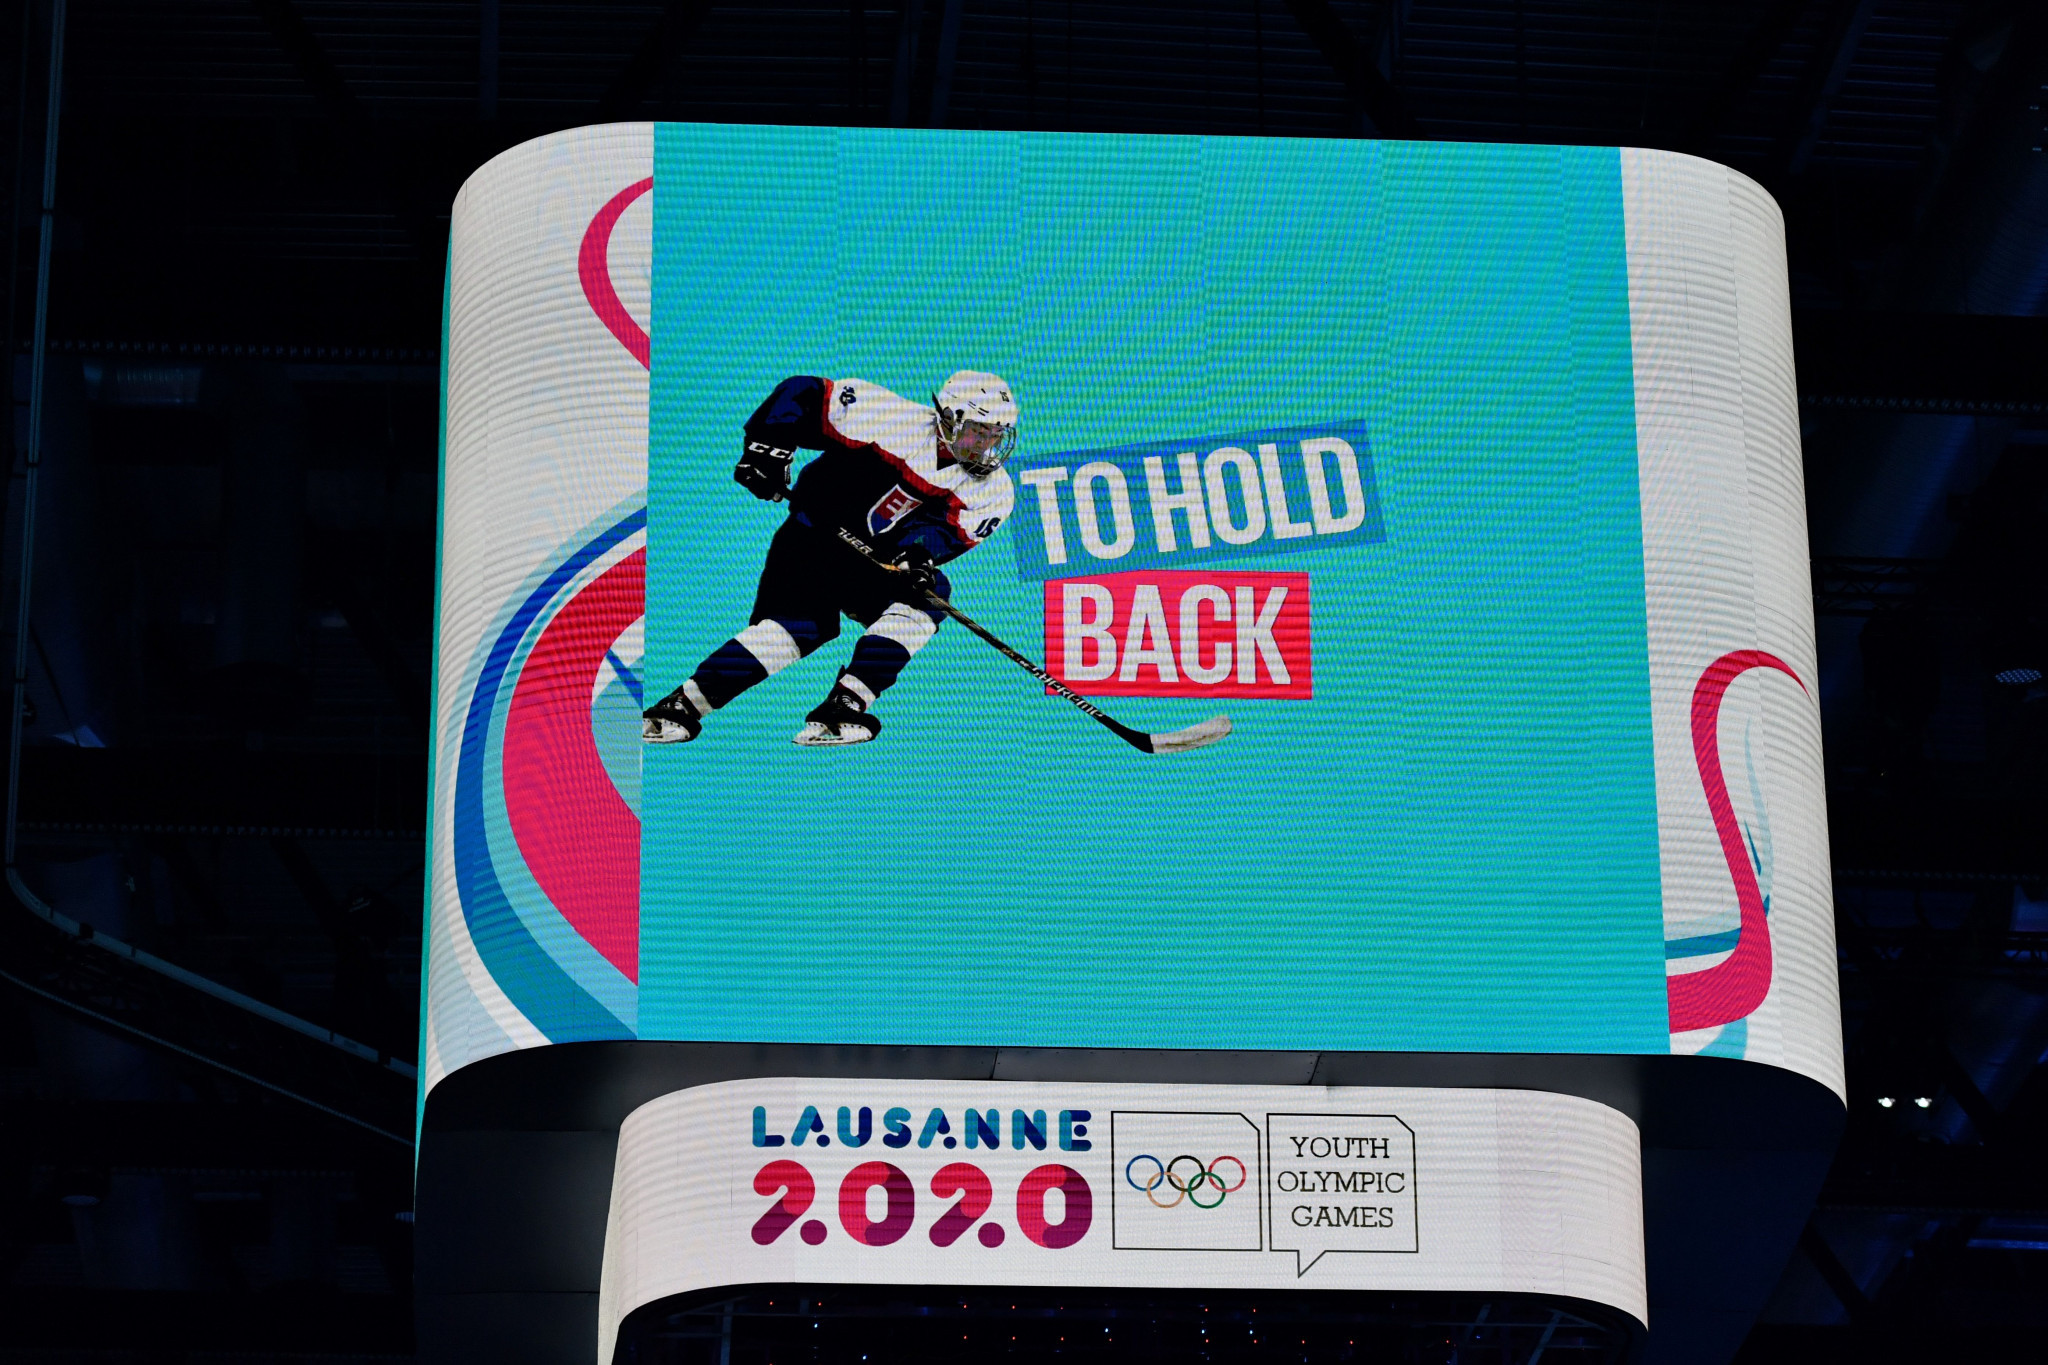 The incidents happened during the ice hockey contest at the Lausanne 2020 Winter Youth Olympic Games ©Getty Images